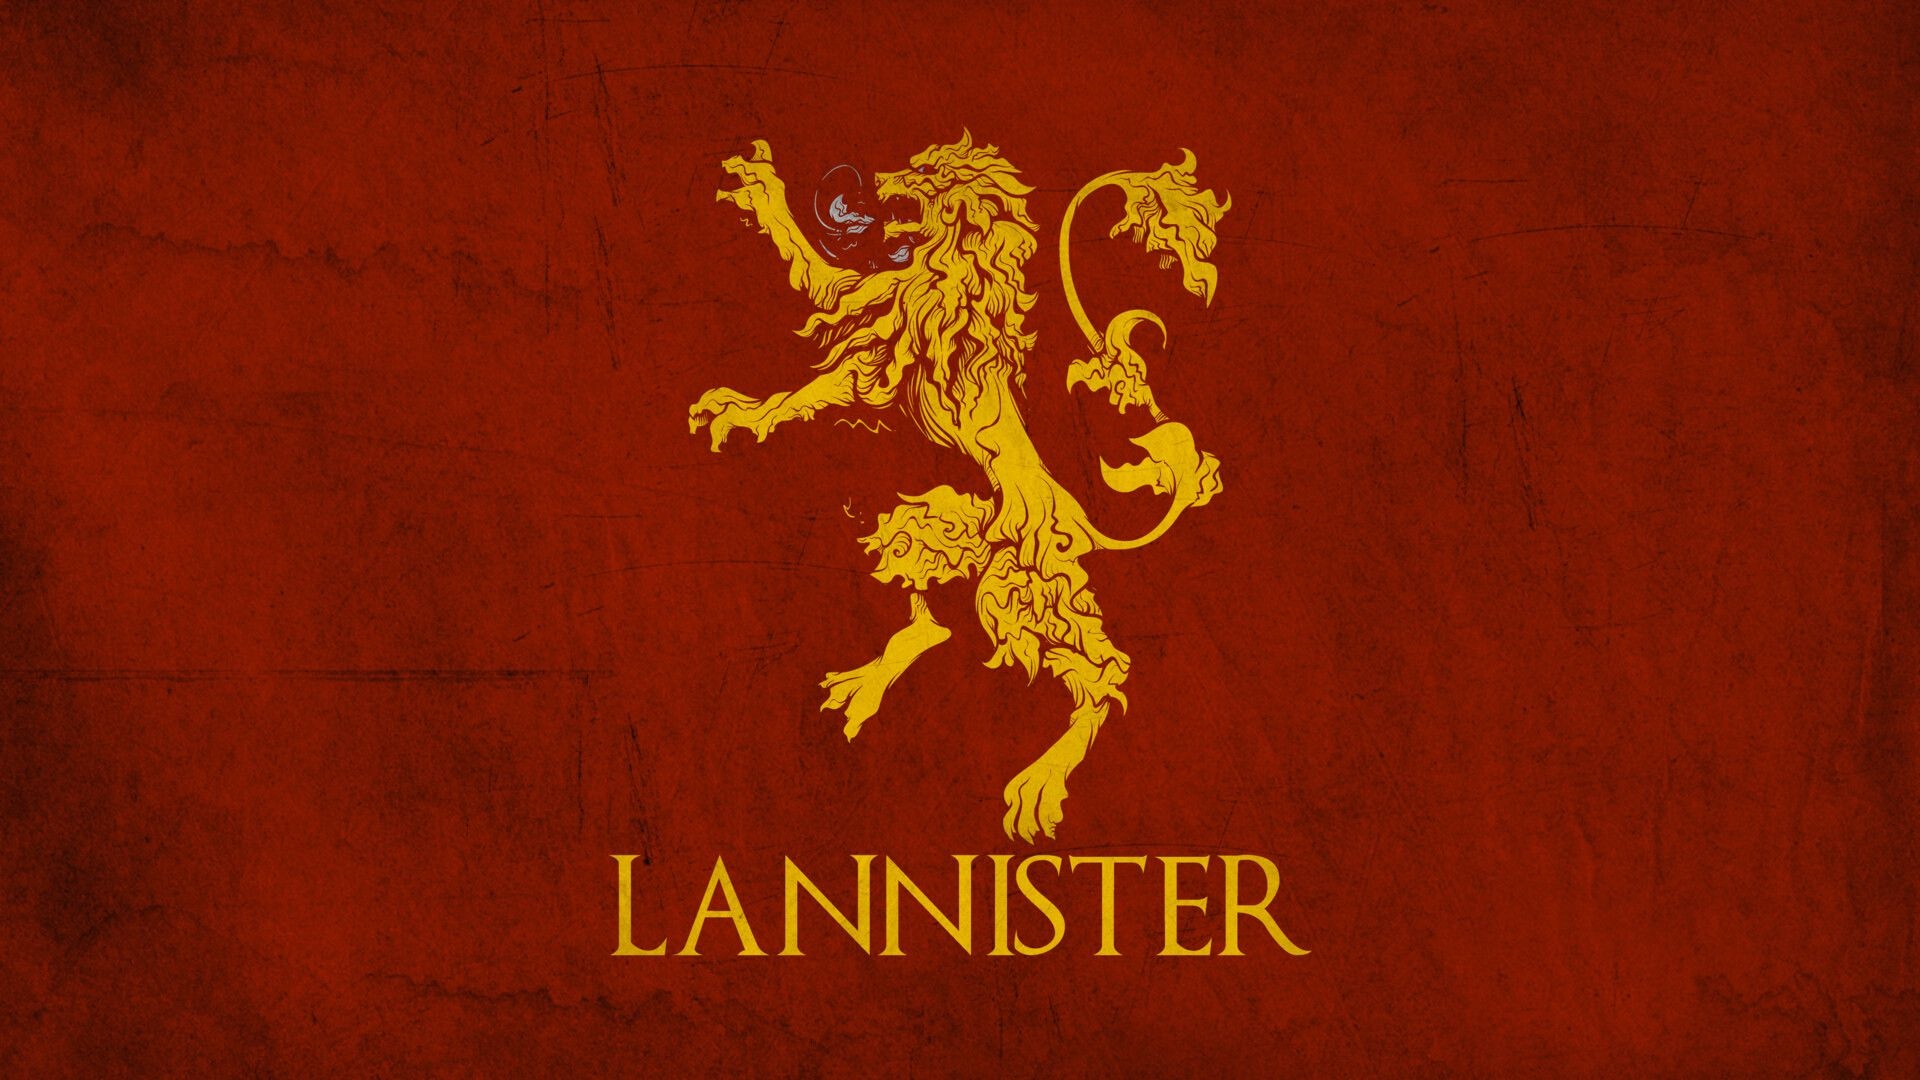 Game of Thrones, Lannister wallpapers, Backgrounds, 1920x1080 Full HD Desktop